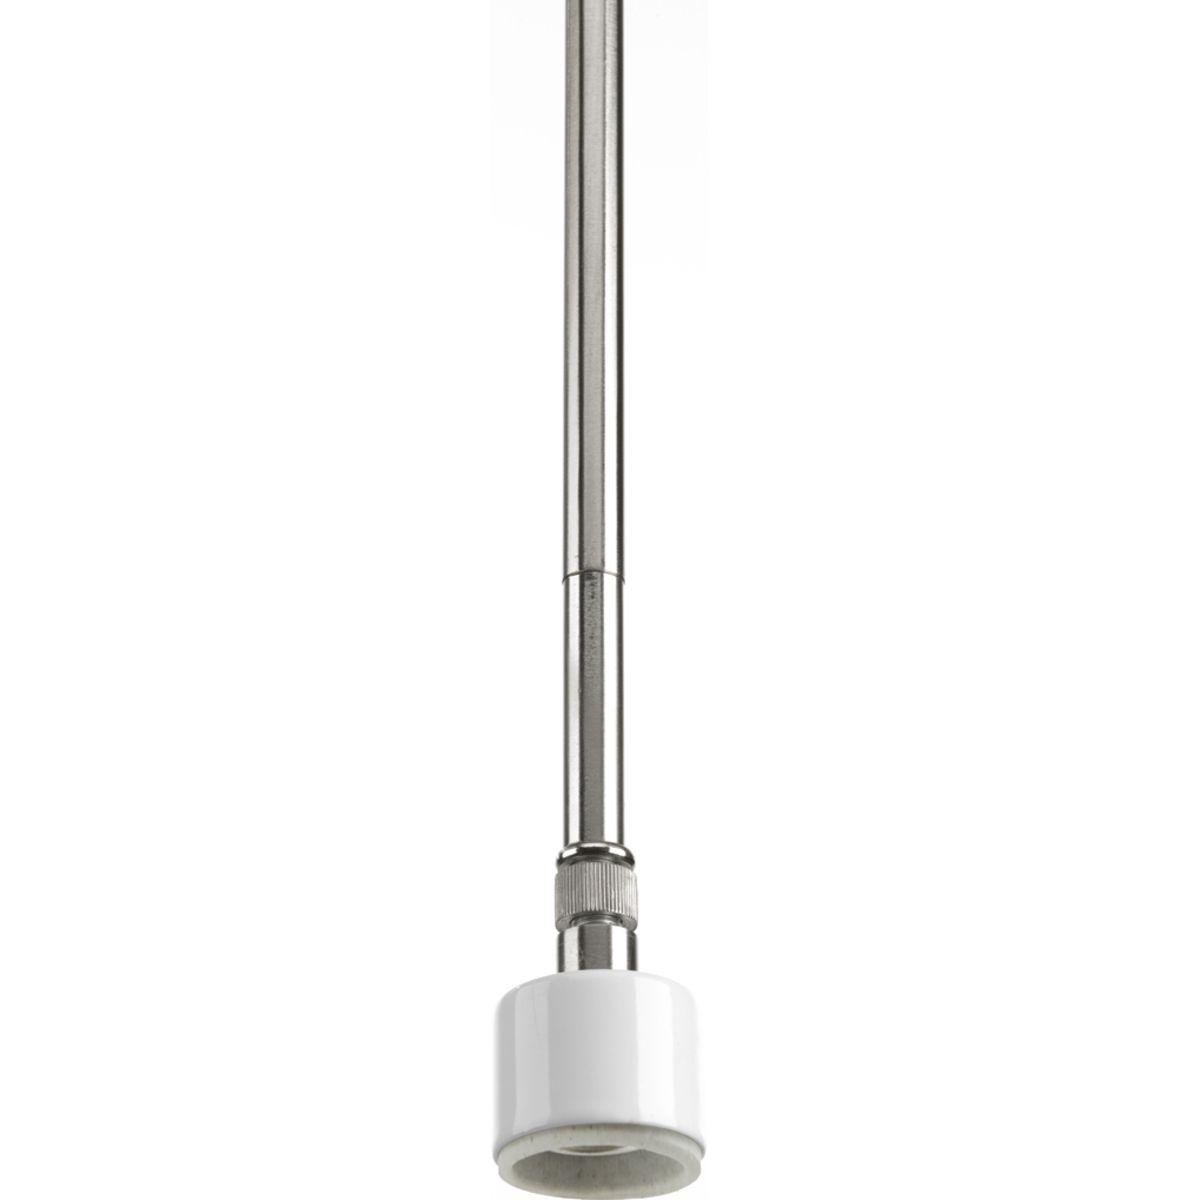 Hubbell P5198-09 The Markor Series is a modular pendant system. The versatile series allow the choice of shades and stem kits. This one-light stem mounted pendant for use with Markor Shades. Shades sold separately. This stem may be used with all Markor shades 9"-22" sizes